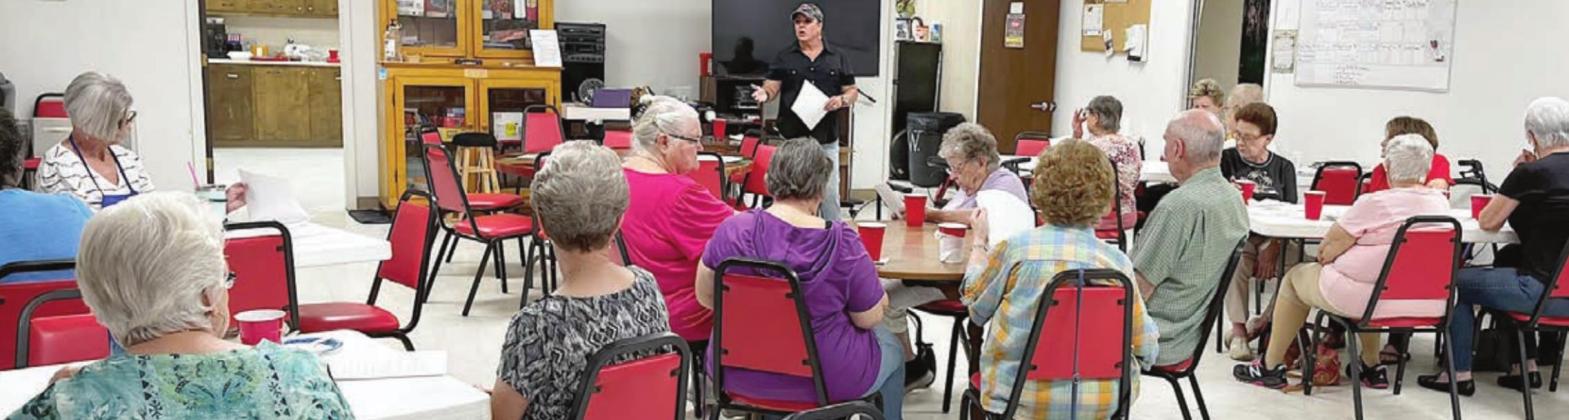 LUNCH-AND-LEARN SPEAKER – Officer Tammie Jo “TJ Mac” McCleney of the Moulton Police Department gave a presentation on “Situational Awareness for Seniors” to a crowd at Senior Connections on Monday, July 25.